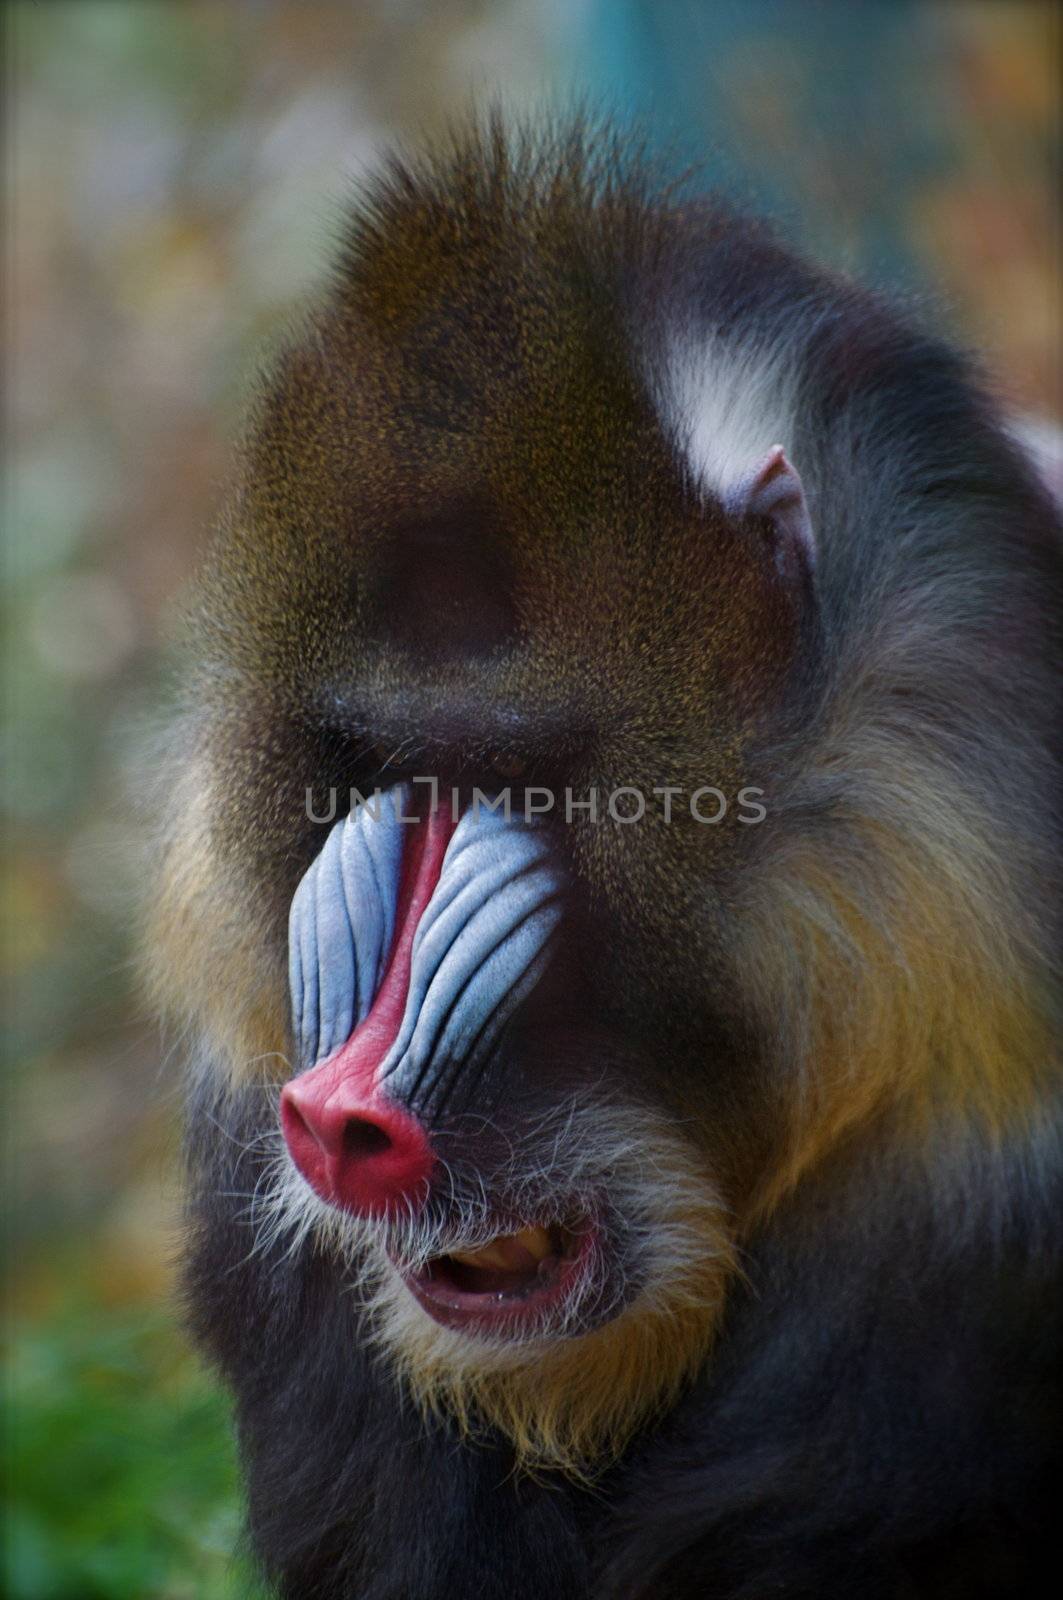 Angry Mandrill Monkey by gilmourbto2001